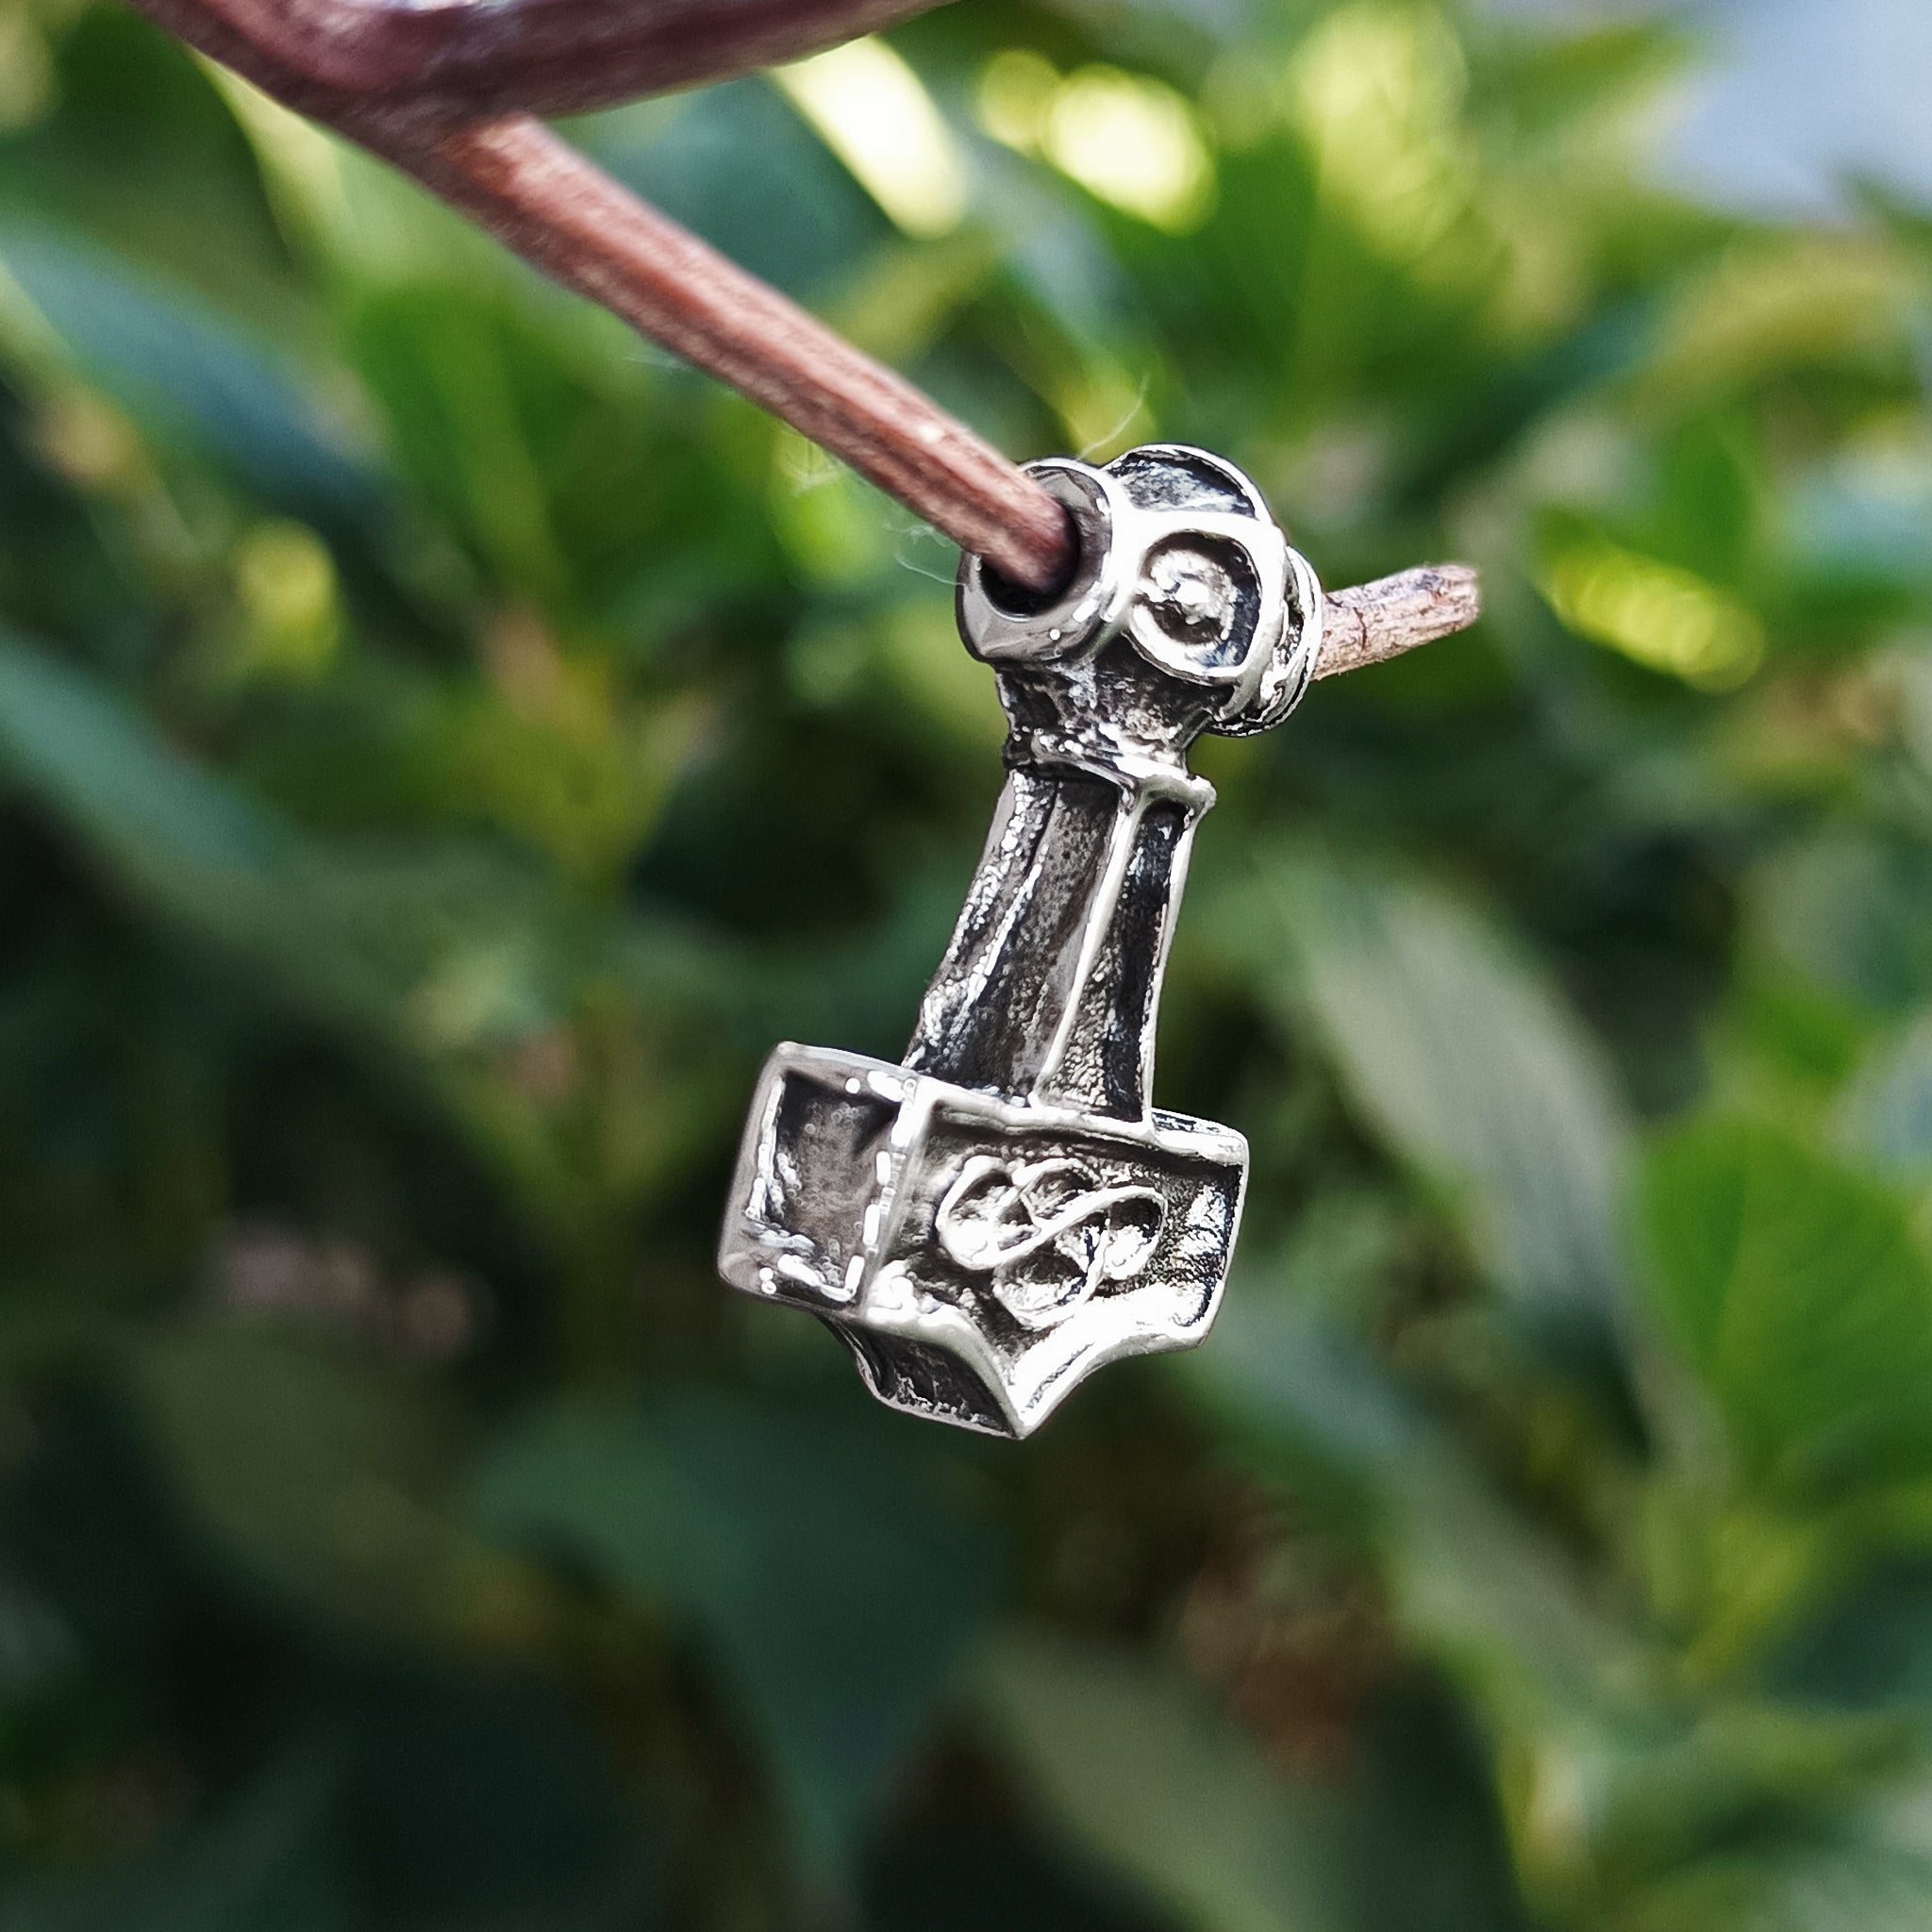 Small Silver Thunder Thors Hammer Pendant in Tree - Side Angle View